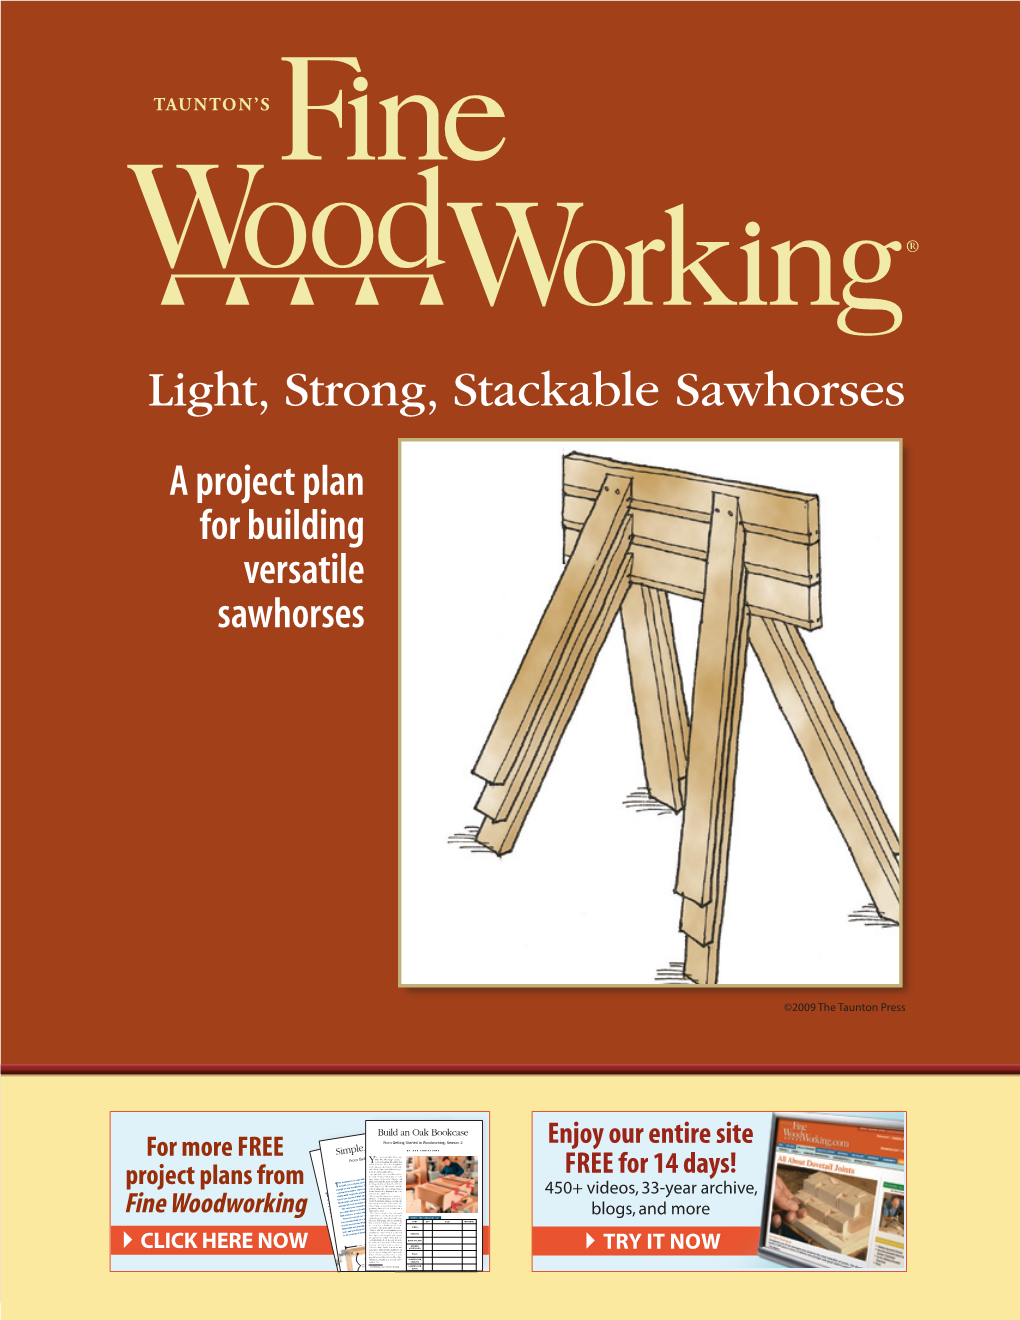 Light, Strong, Stackable Sawhorses